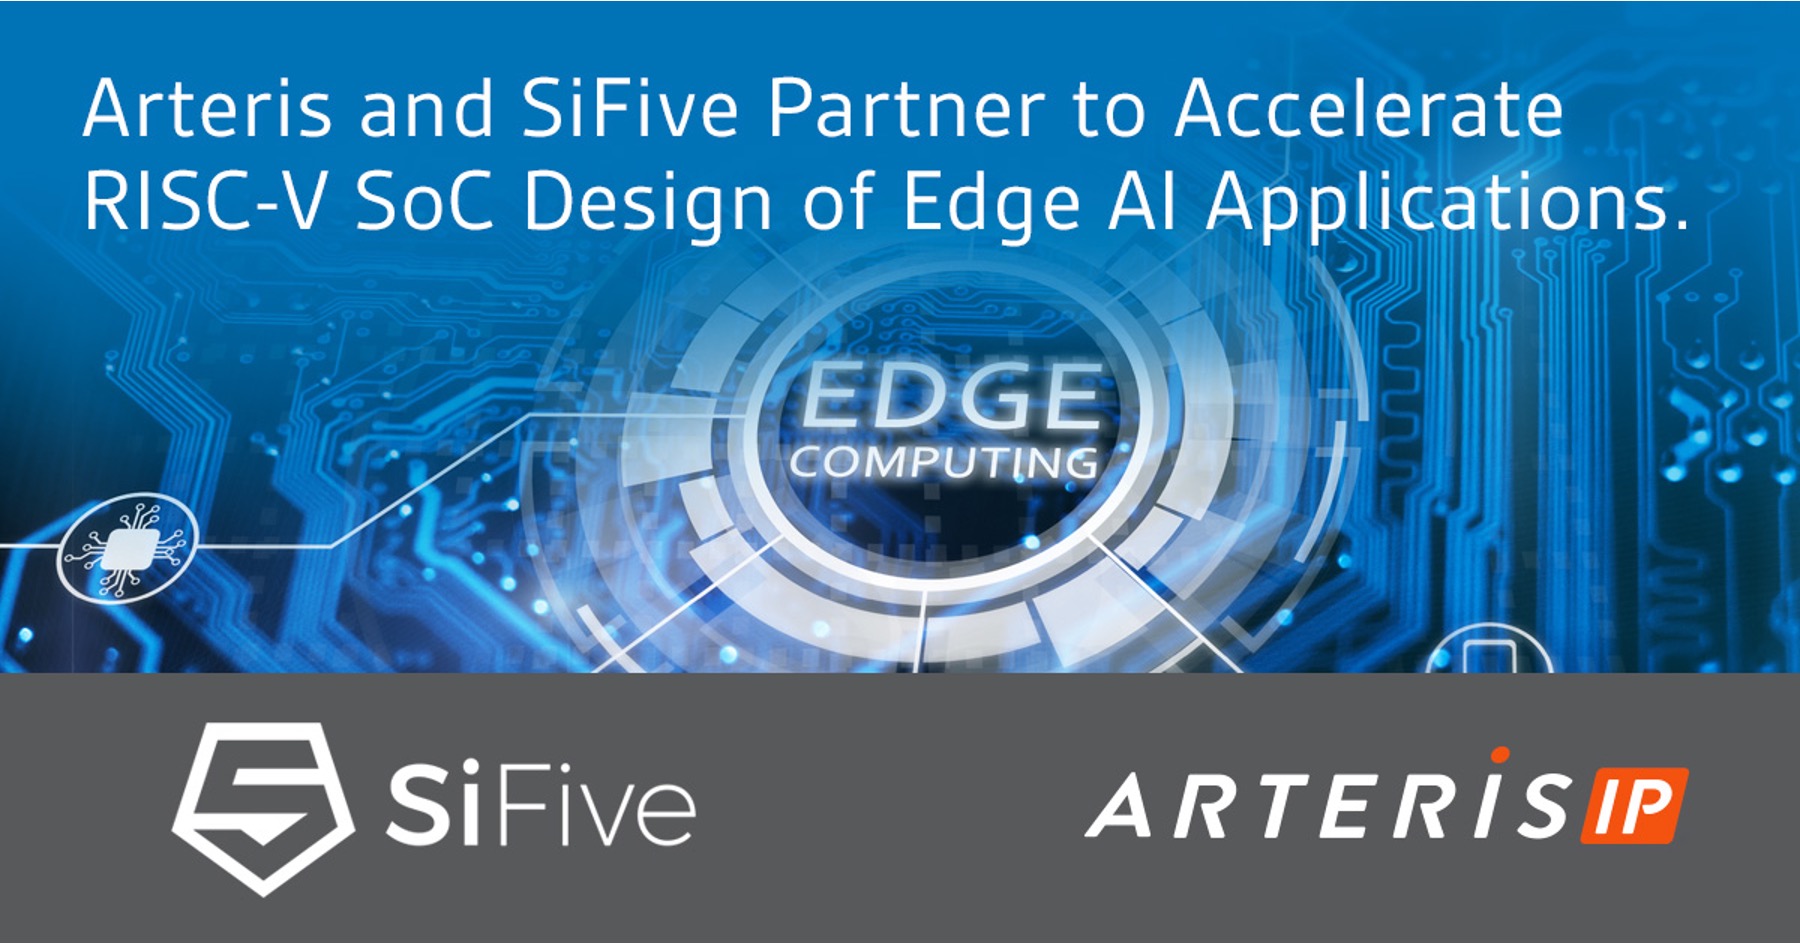 Arteris and SiFive Partner to Accelerate RISC-V SoC Design of Edge Al Applications